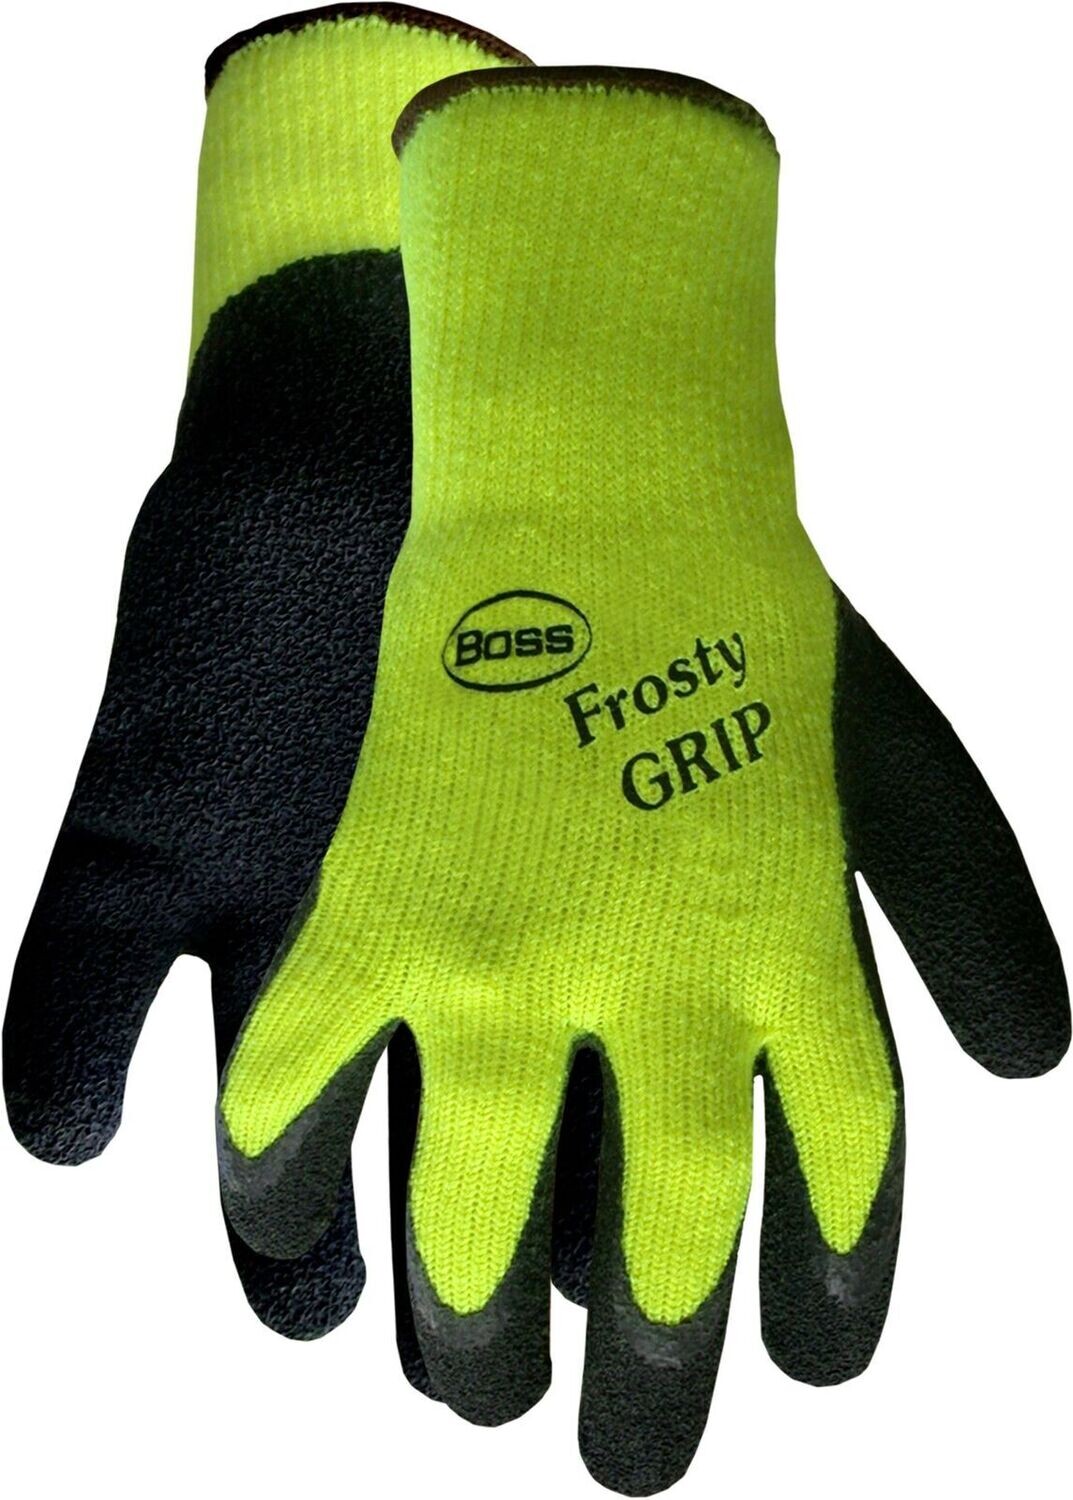 Boss Frosty Grip High-VIS Insulated Rubber Palm Gloves 12 count #8439L